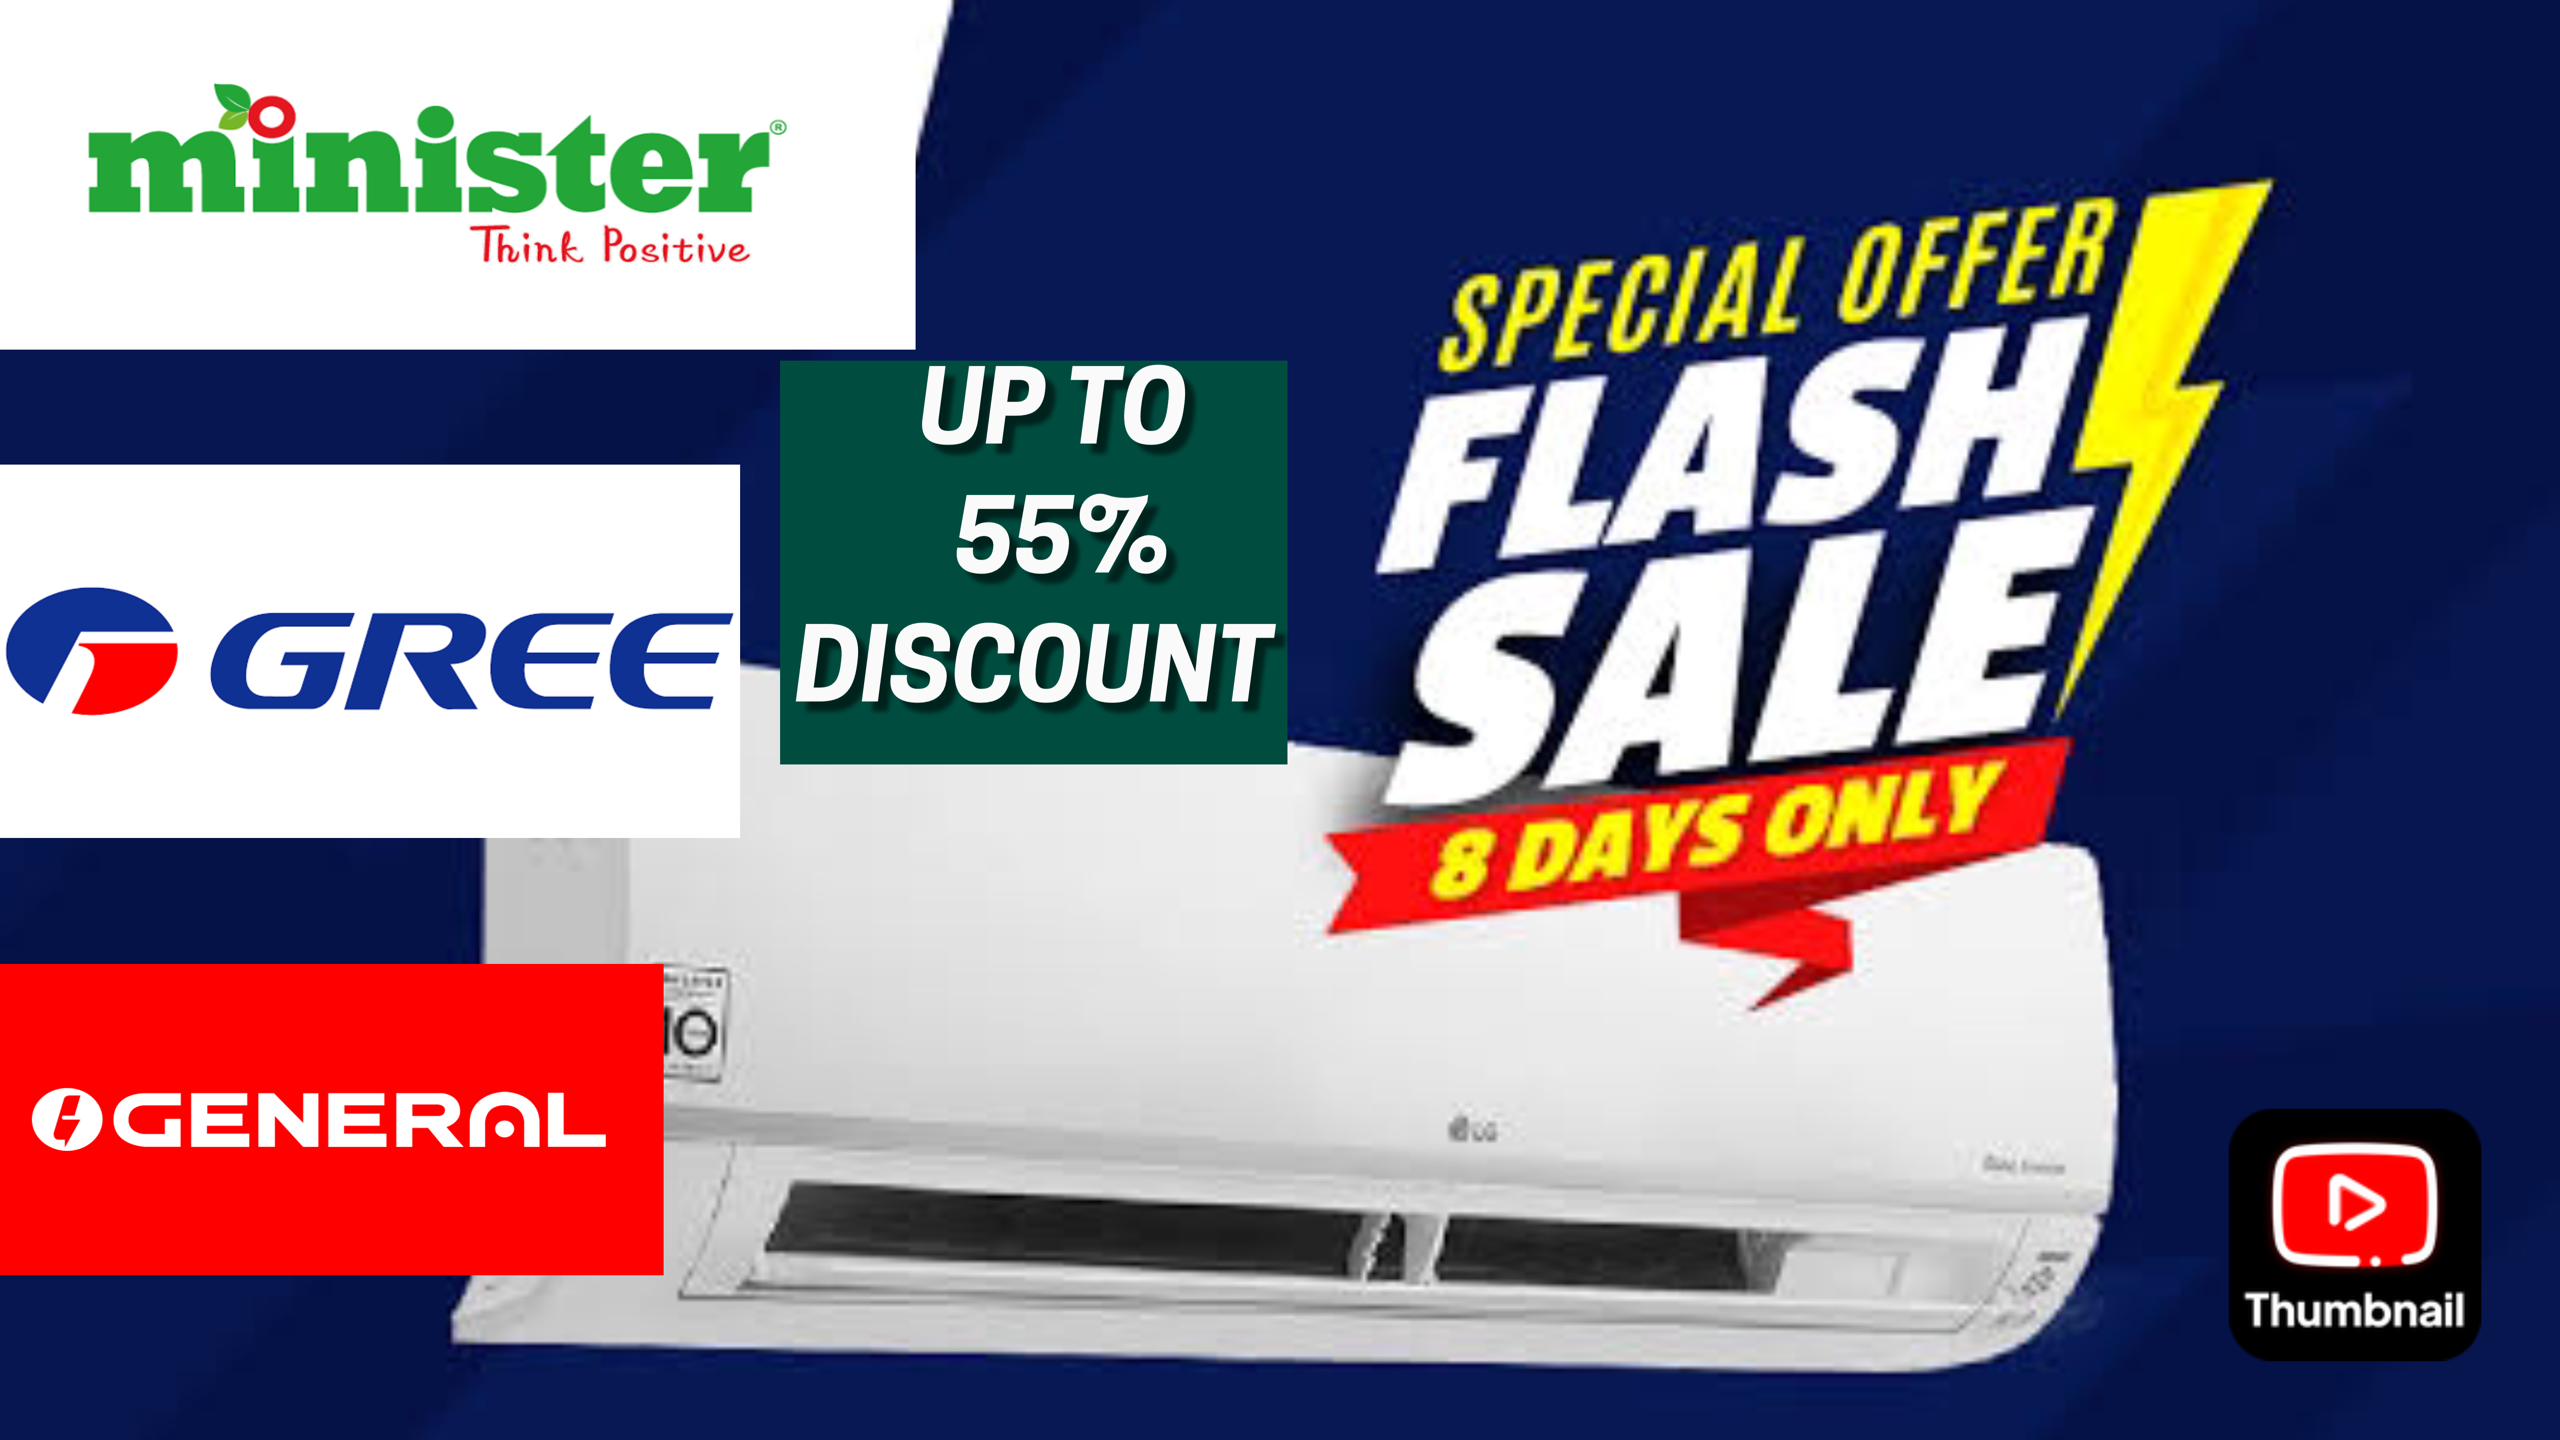 Ac deal up To 55% offer